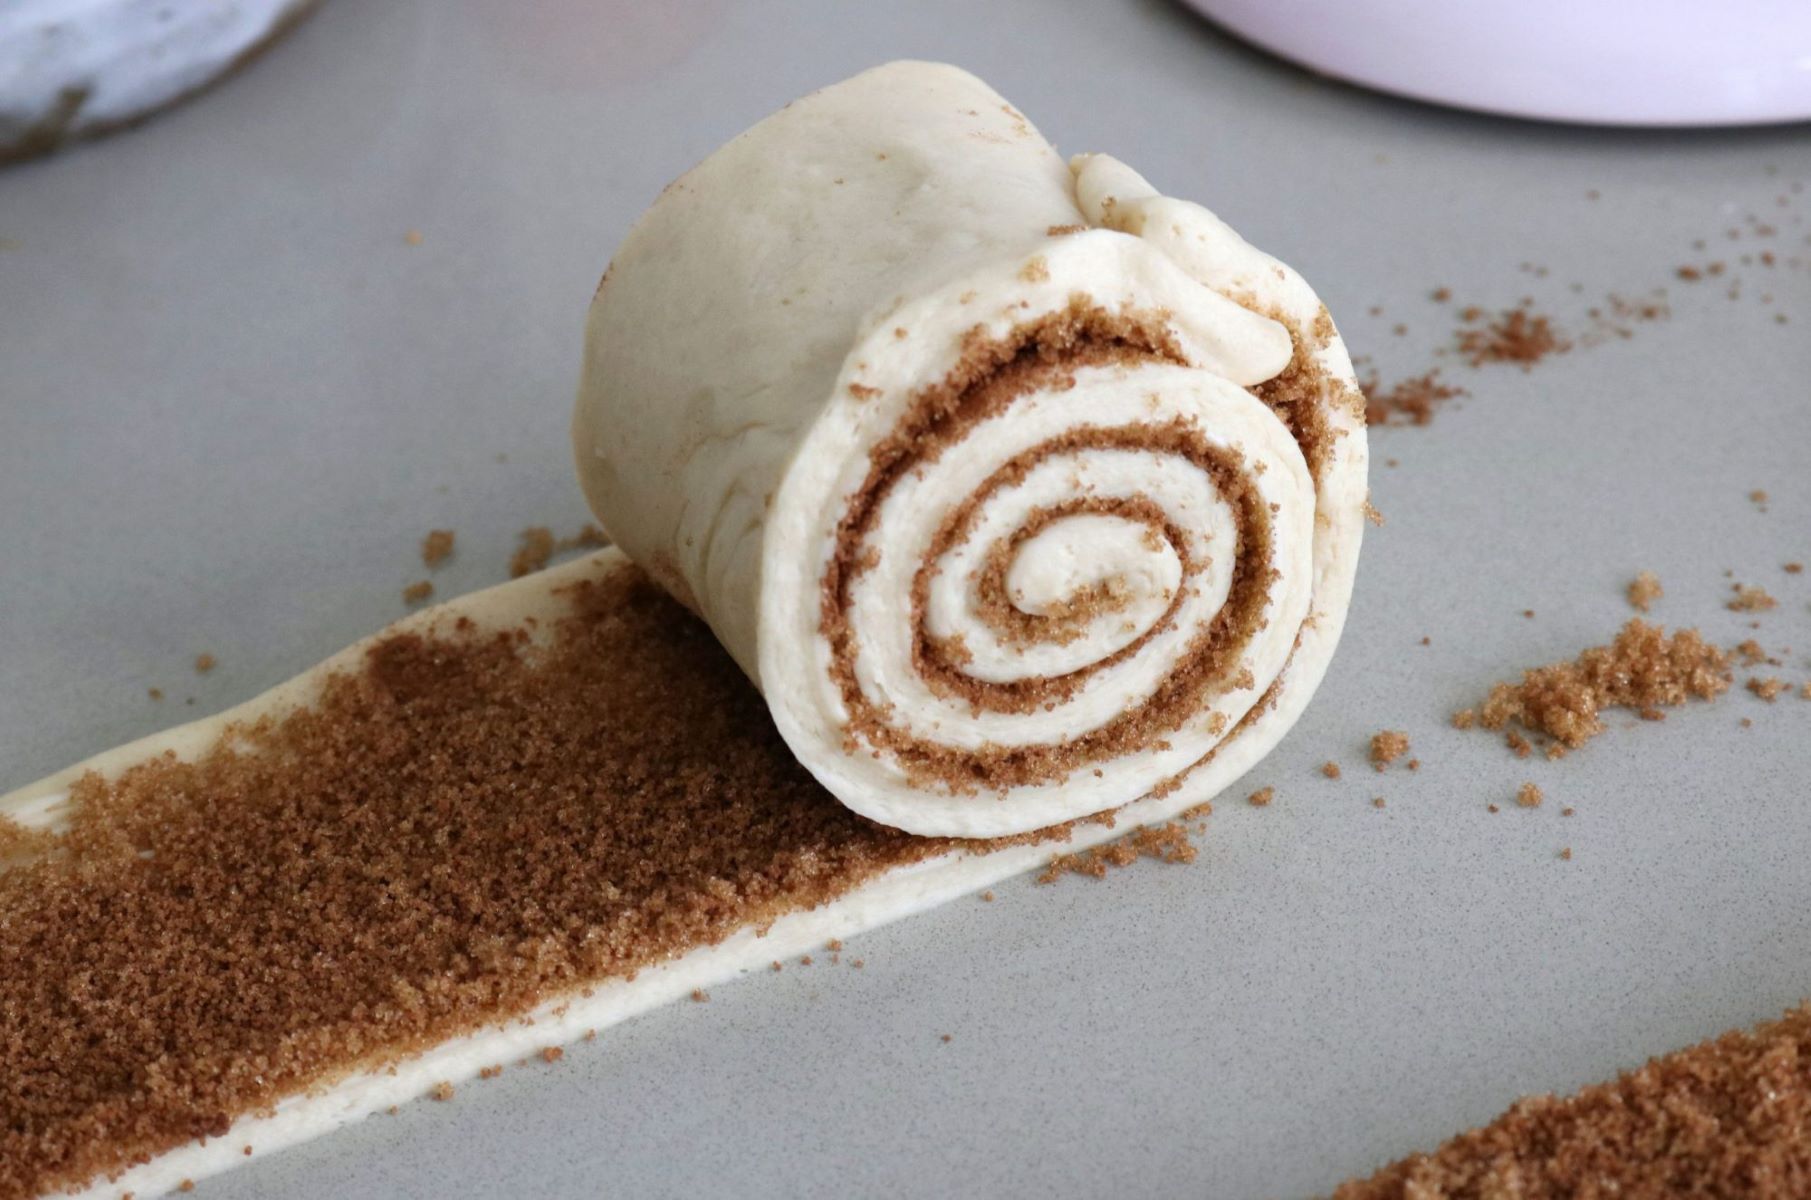 How To Store Cinnamon Roll Dough Overnight